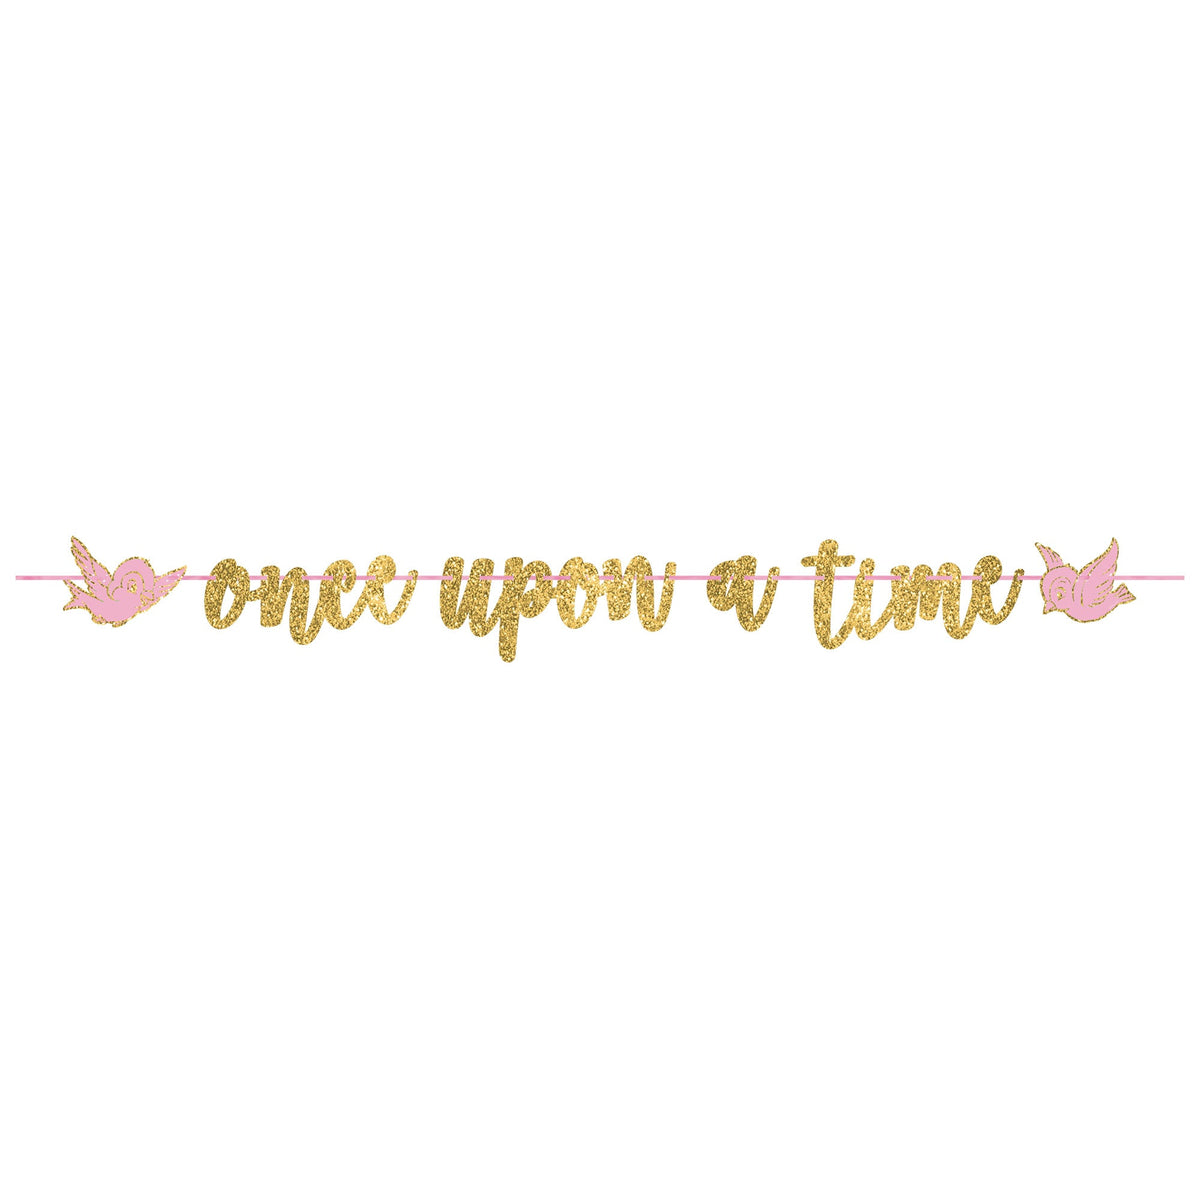 Disney Princess 12' x 8" Glitter Ribbon "Once Upon a Time" Letter Banner